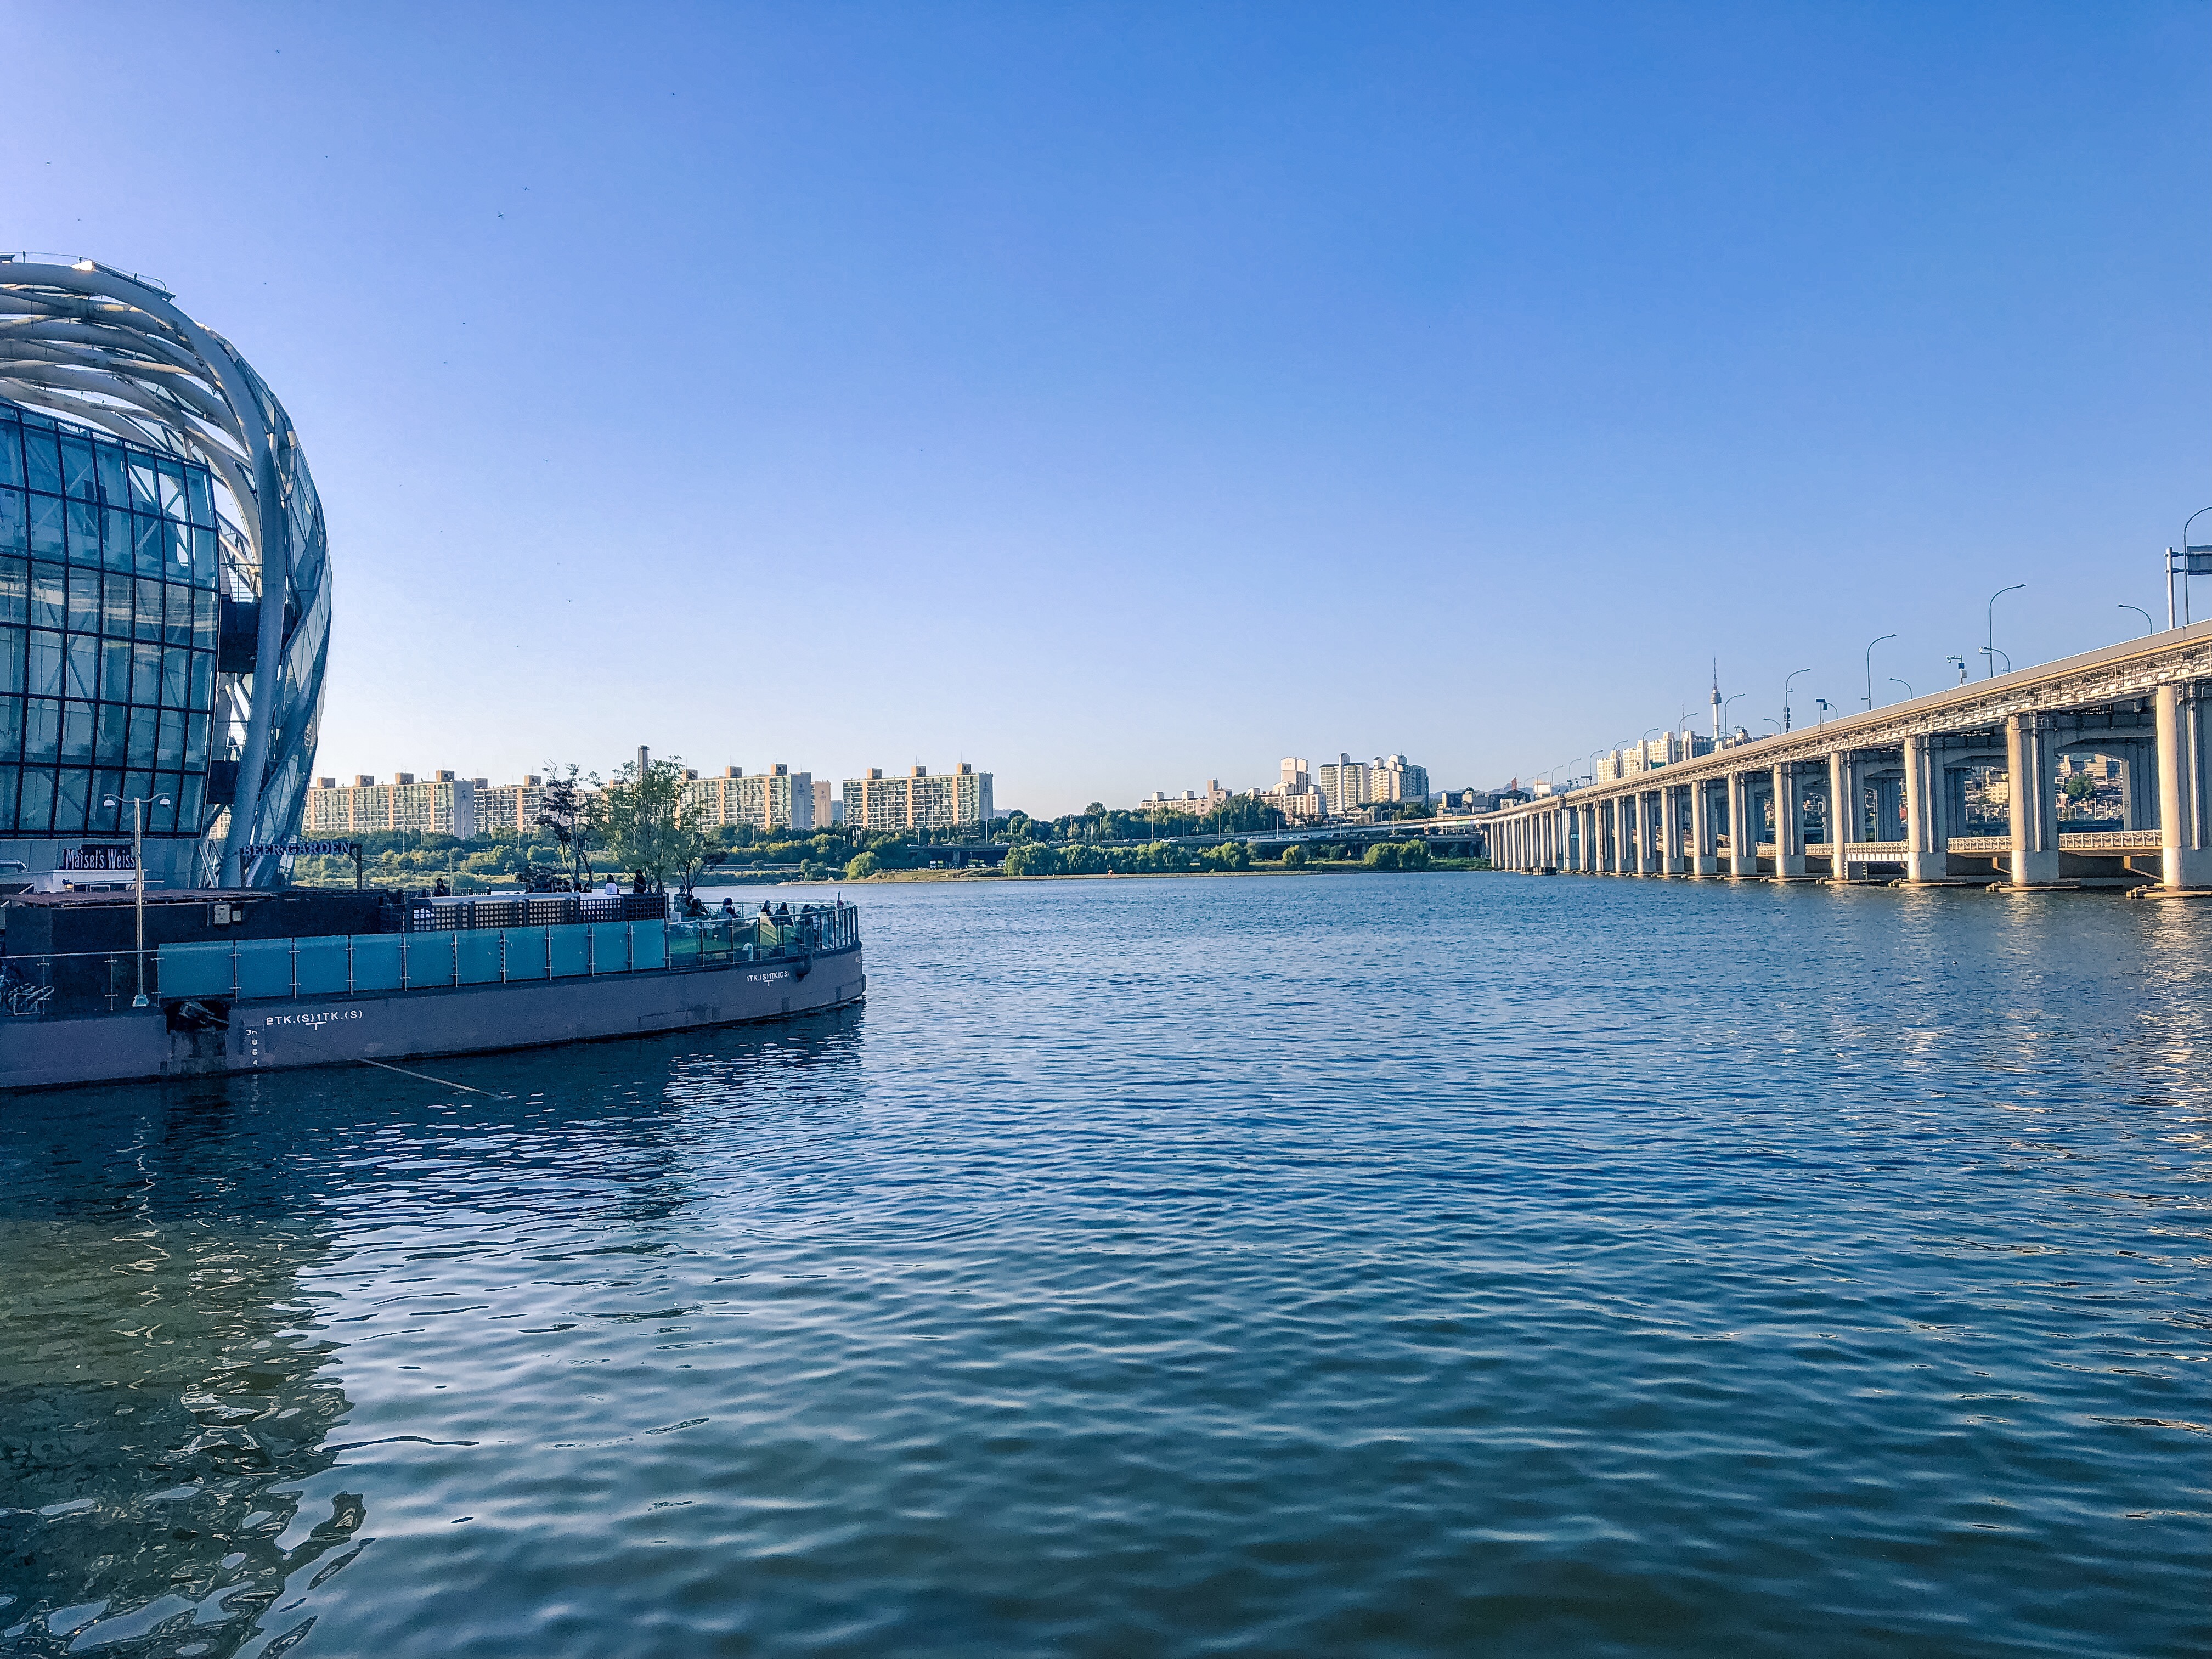 Biking the Han River: Learn more about how to prepare for a beautiful afternoon #biking the #Han River in #Seoul, South Korea. From where to rent a bike to what to see!